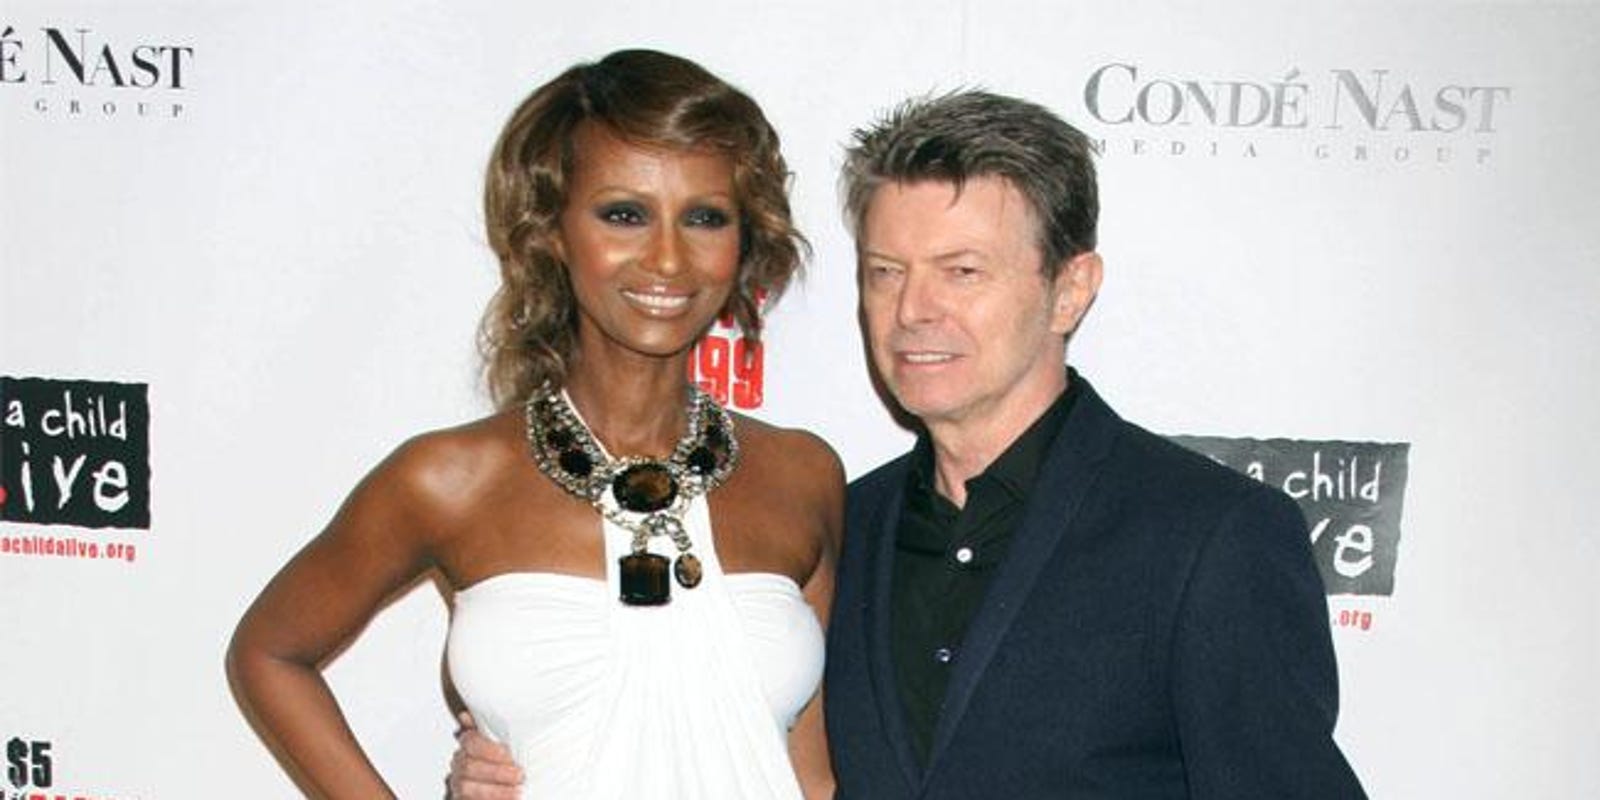 Harry Potter Ariana Grande Porn - David Bowie was lonely before meeting Iman